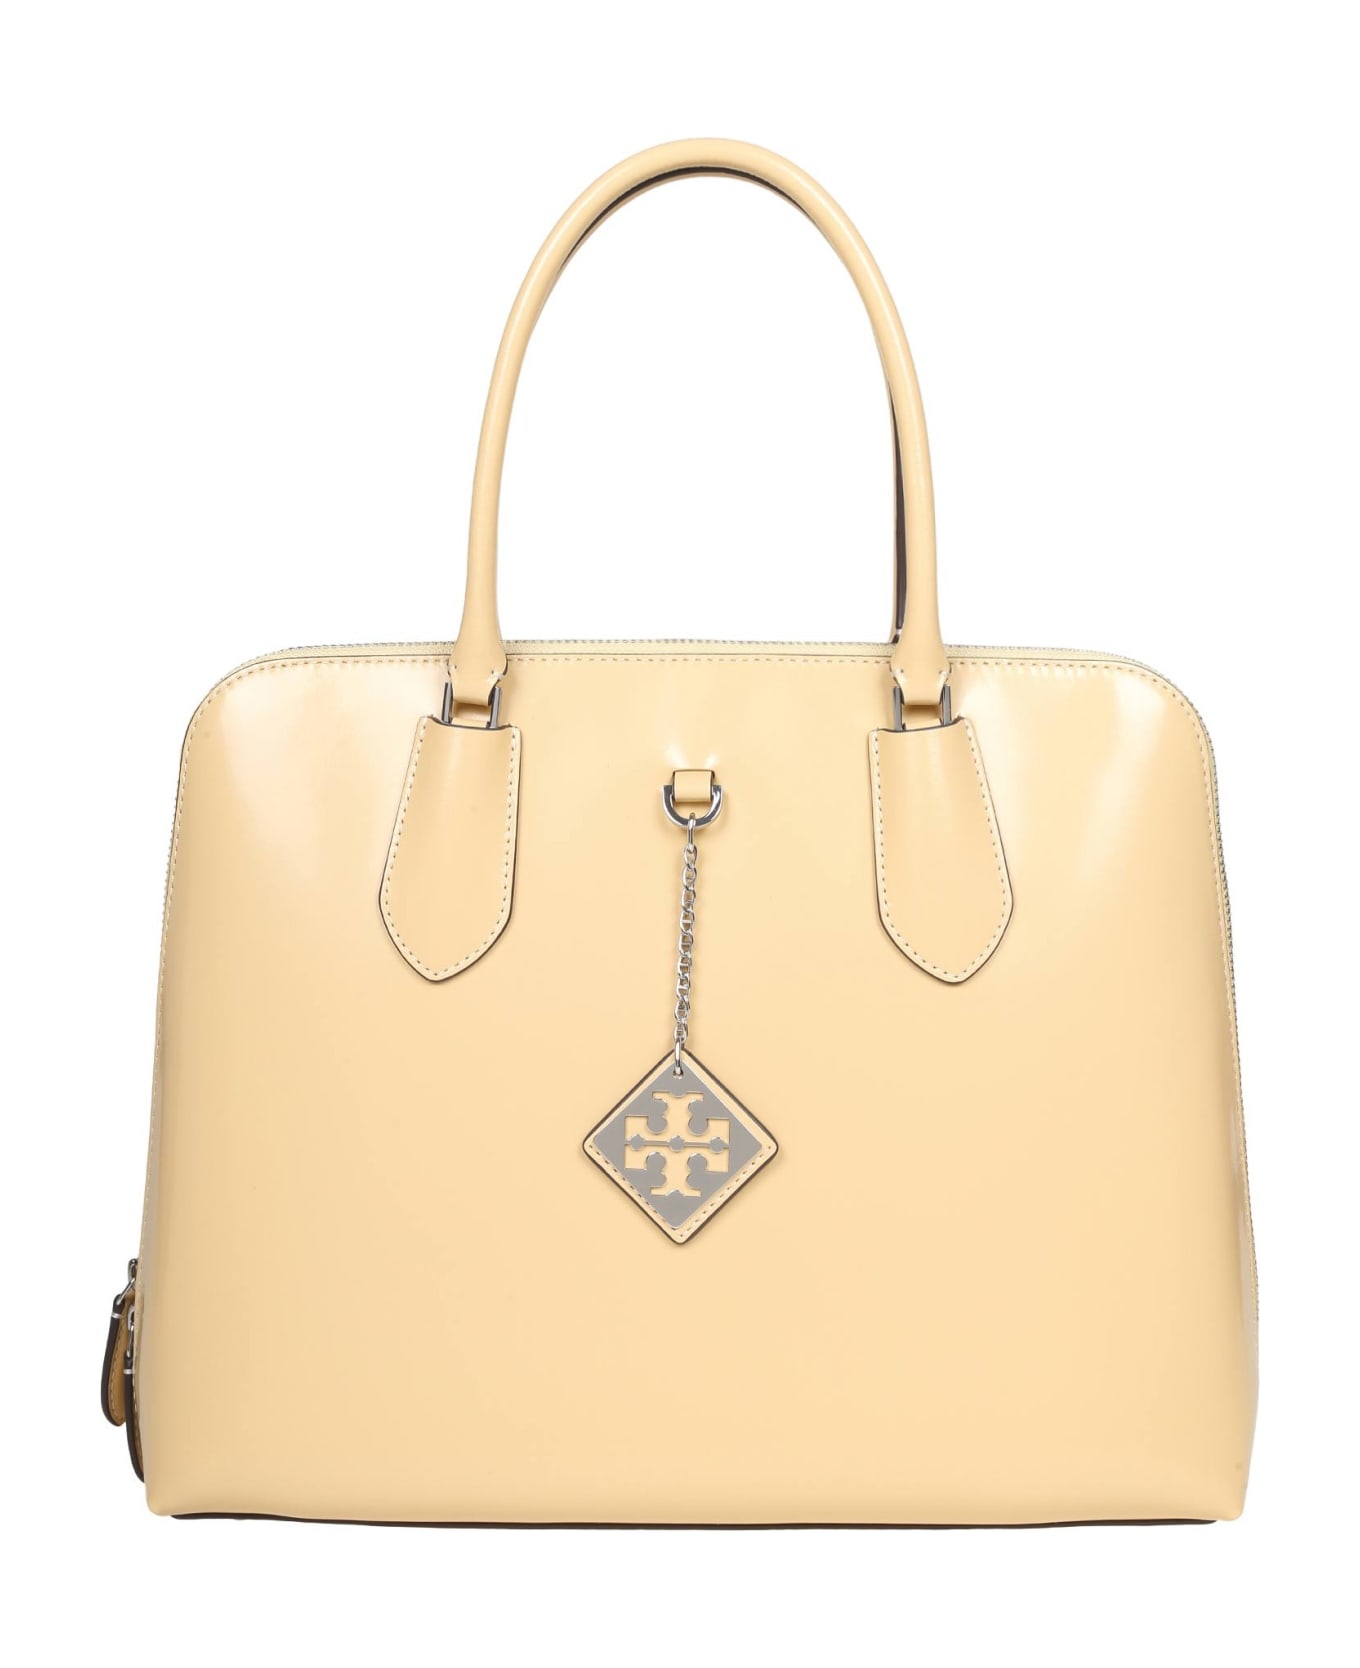 Tory Burch Swing Bag In Almond Brushed Leather - Almond